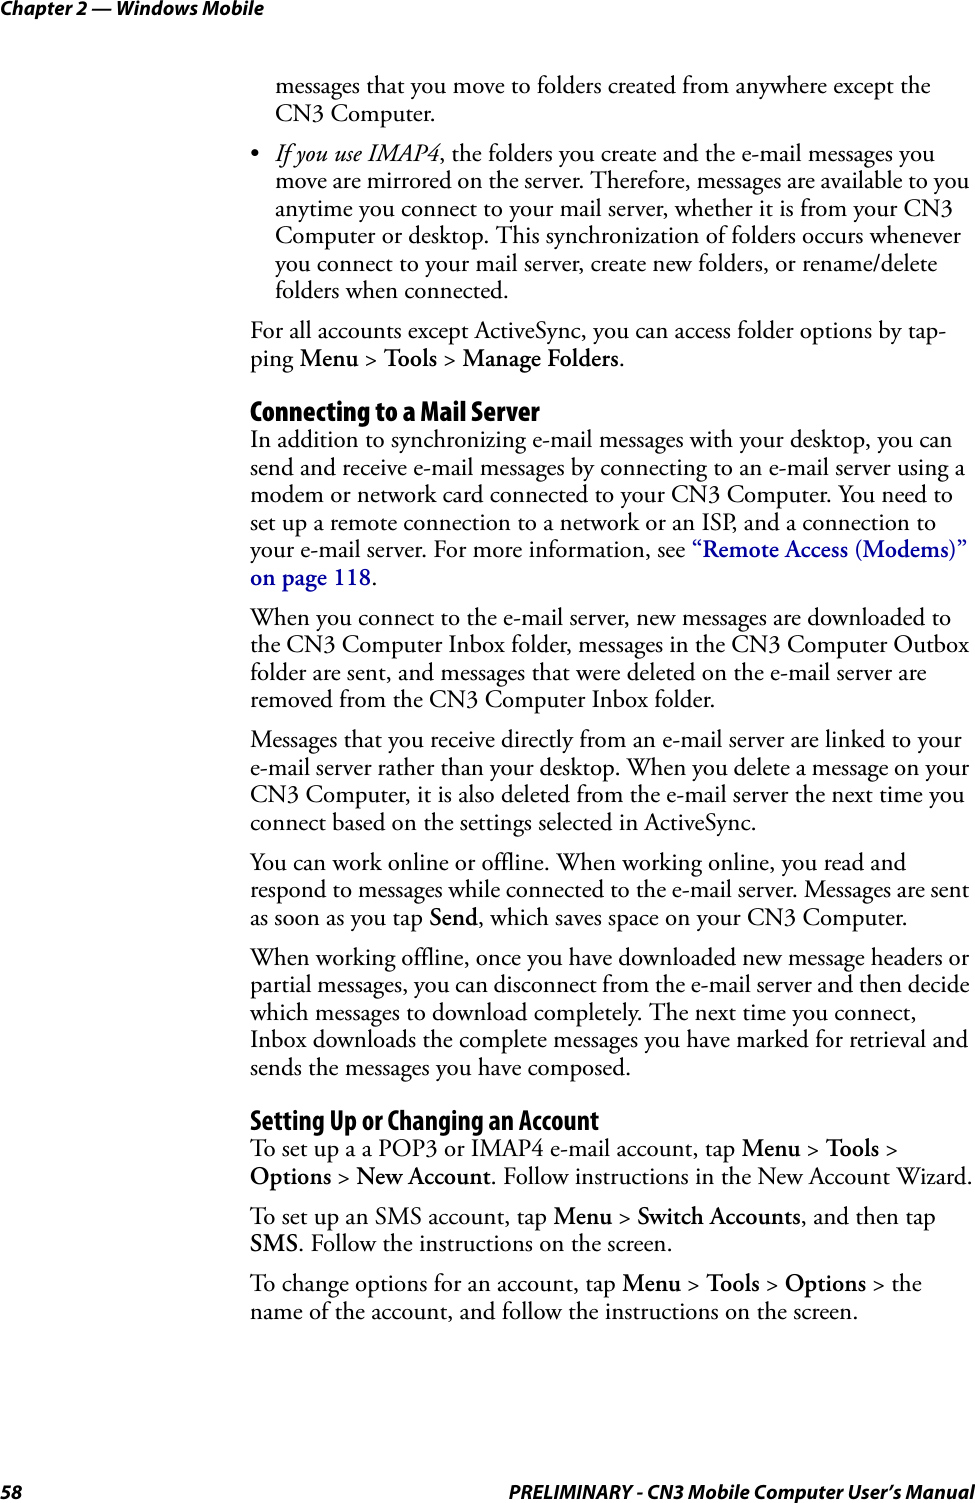 Chapter 2 — Windows Mobile58 PRELIMINARY - CN3 Mobile Computer User’s Manualmessages that you move to folders created from anywhere except the CN3 Computer.•If you use IMAP4, the folders you create and the e-mail messages you move are mirrored on the server. Therefore, messages are available to you anytime you connect to your mail server, whether it is from your CN3 Computer or desktop. This synchronization of folders occurs whenever you connect to your mail server, create new folders, or rename/delete folders when connected.For all accounts except ActiveSync, you can access folder options by tap-ping Menu &gt; To o l s  &gt; Manage Folders.Connecting to a Mail ServerIn addition to synchronizing e-mail messages with your desktop, you can send and receive e-mail messages by connecting to an e-mail server using a modem or network card connected to your CN3 Computer. You need to set up a remote connection to a network or an ISP, and a connection to your e-mail server. For more information, see “Remote Access (Modems)” on page 118.When you connect to the e-mail server, new messages are downloaded to the CN3 Computer Inbox folder, messages in the CN3 Computer Outbox folder are sent, and messages that were deleted on the e-mail server are removed from the CN3 Computer Inbox folder.Messages that you receive directly from an e-mail server are linked to your e-mail server rather than your desktop. When you delete a message on your CN3 Computer, it is also deleted from the e-mail server the next time you connect based on the settings selected in ActiveSync.You can work online or offline. When working online, you read and respond to messages while connected to the e-mail server. Messages are sent as soon as you tap Send, which saves space on your CN3 Computer.When working offline, once you have downloaded new message headers or partial messages, you can disconnect from the e-mail server and then decide which messages to download completely. The next time you connect, Inbox downloads the complete messages you have marked for retrieval and sends the messages you have composed.Setting Up or Changing an AccountTo set up a a POP3 or IMAP4 e-mail account, tap Menu &gt; To o l s  &gt; Options &gt; New Account. Follow instructions in the New Account Wizard.To set up an SMS account, tap Menu &gt; Switch Accounts, and then tap SMS. Follow the instructions on the screen.To change options for an account, tap Menu &gt; To o l s  &gt; Options &gt; the name of the account, and follow the instructions on the screen.